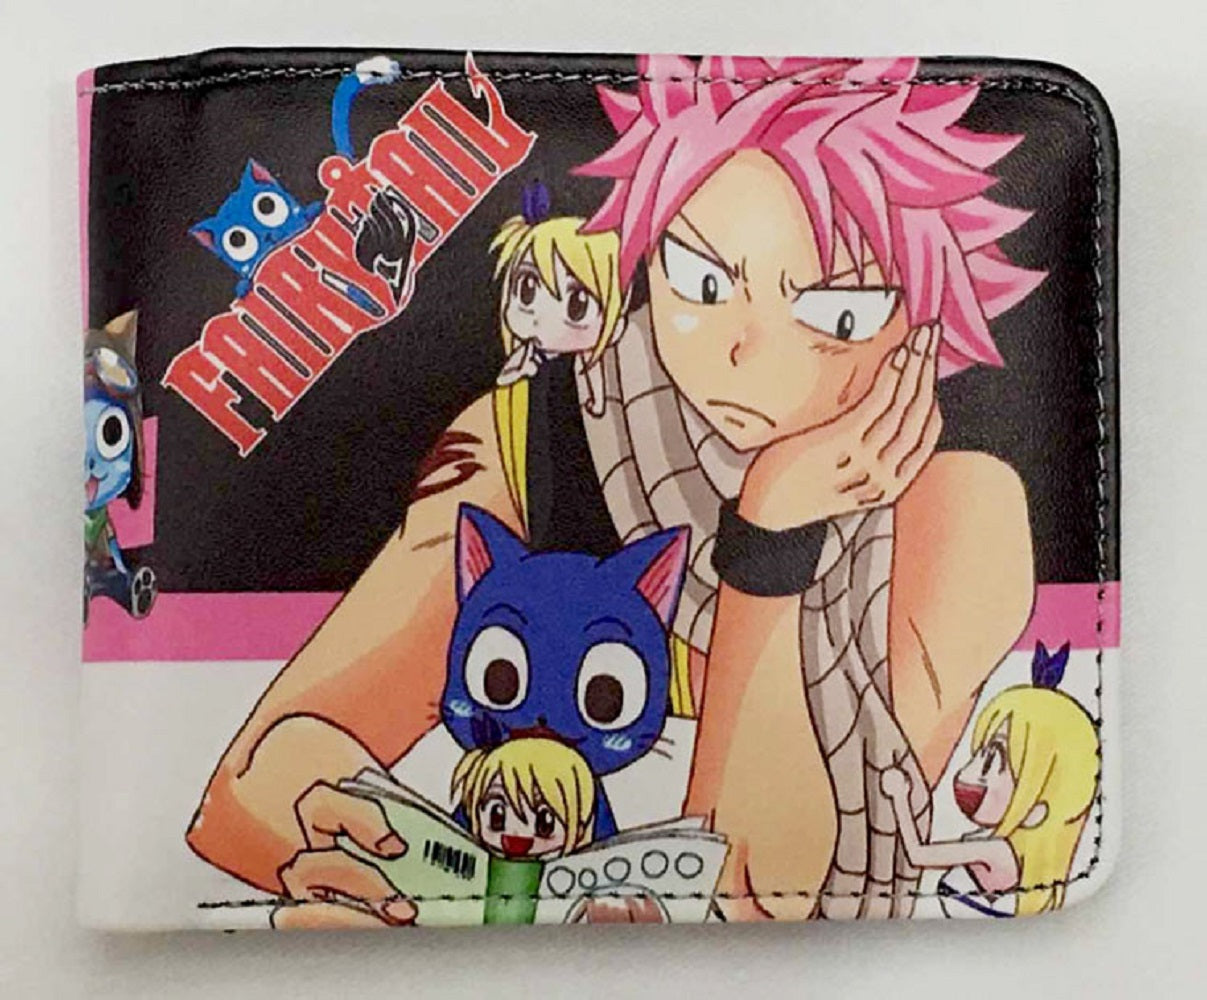 Fairy Tail Natsu Wallet - Super Anime Store FREE SHIPPING FAST SHIPPING USA